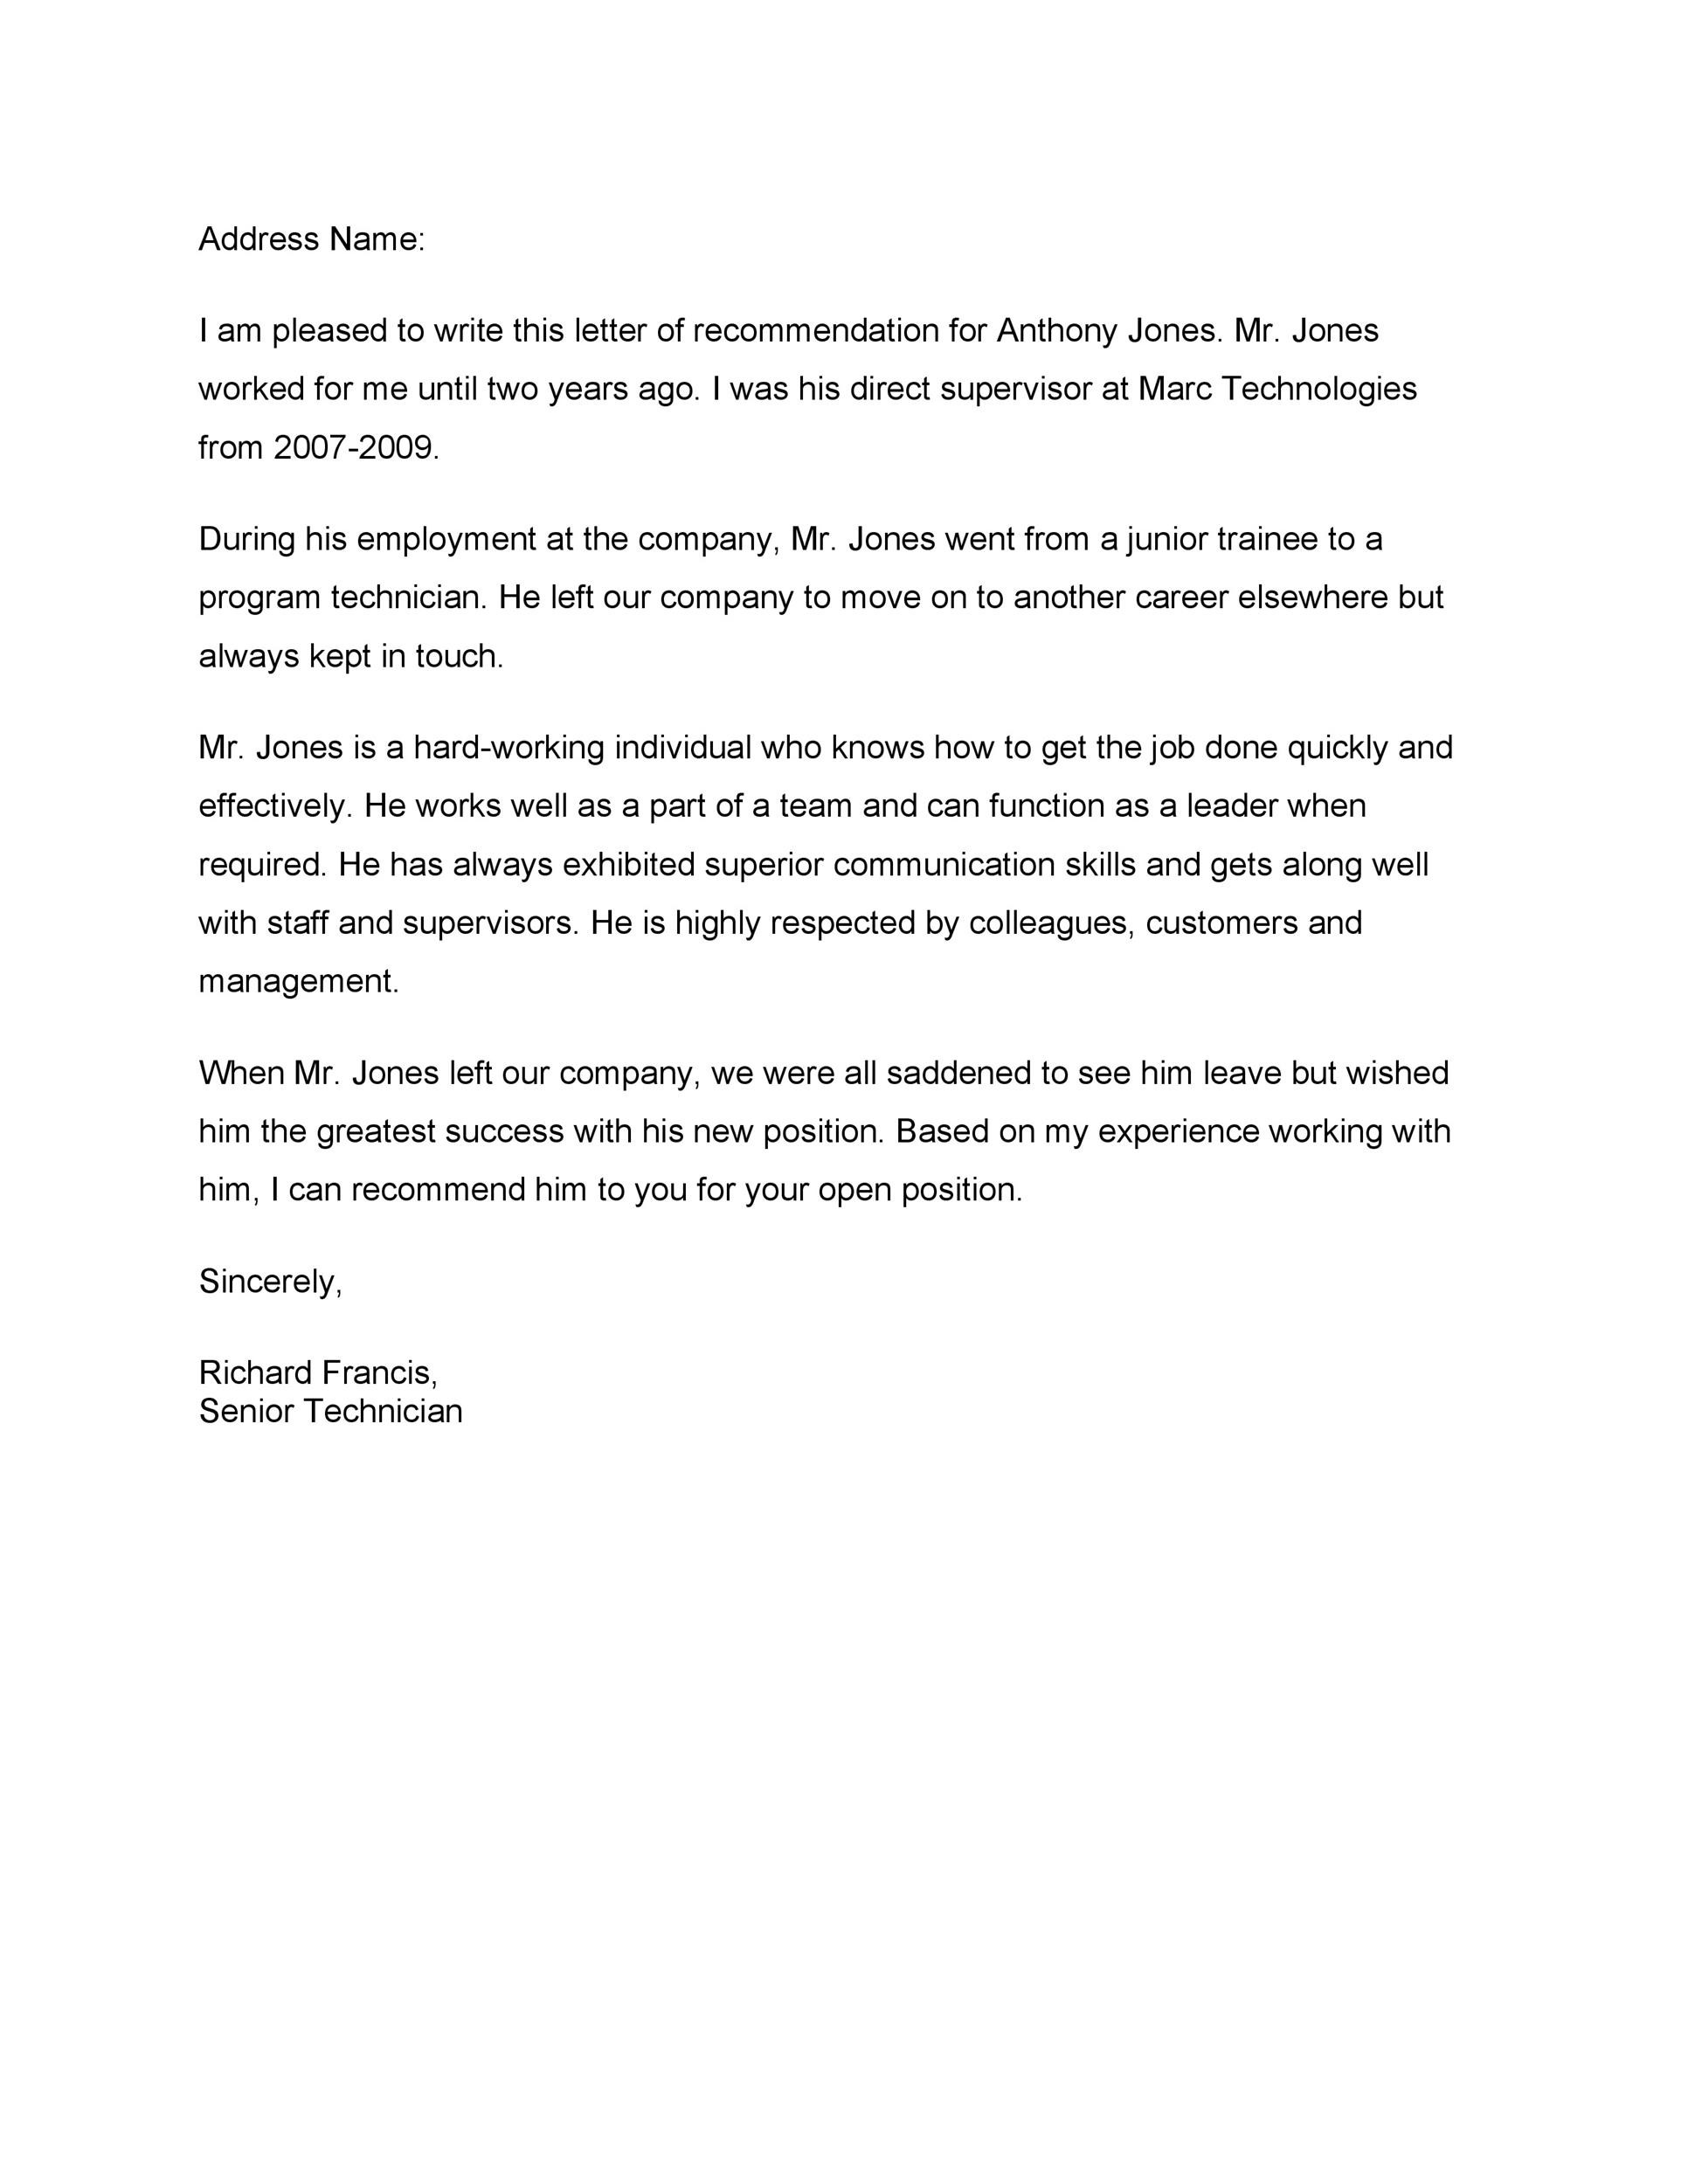 Sample Of Reference Letter For An Employee from templatelab.com